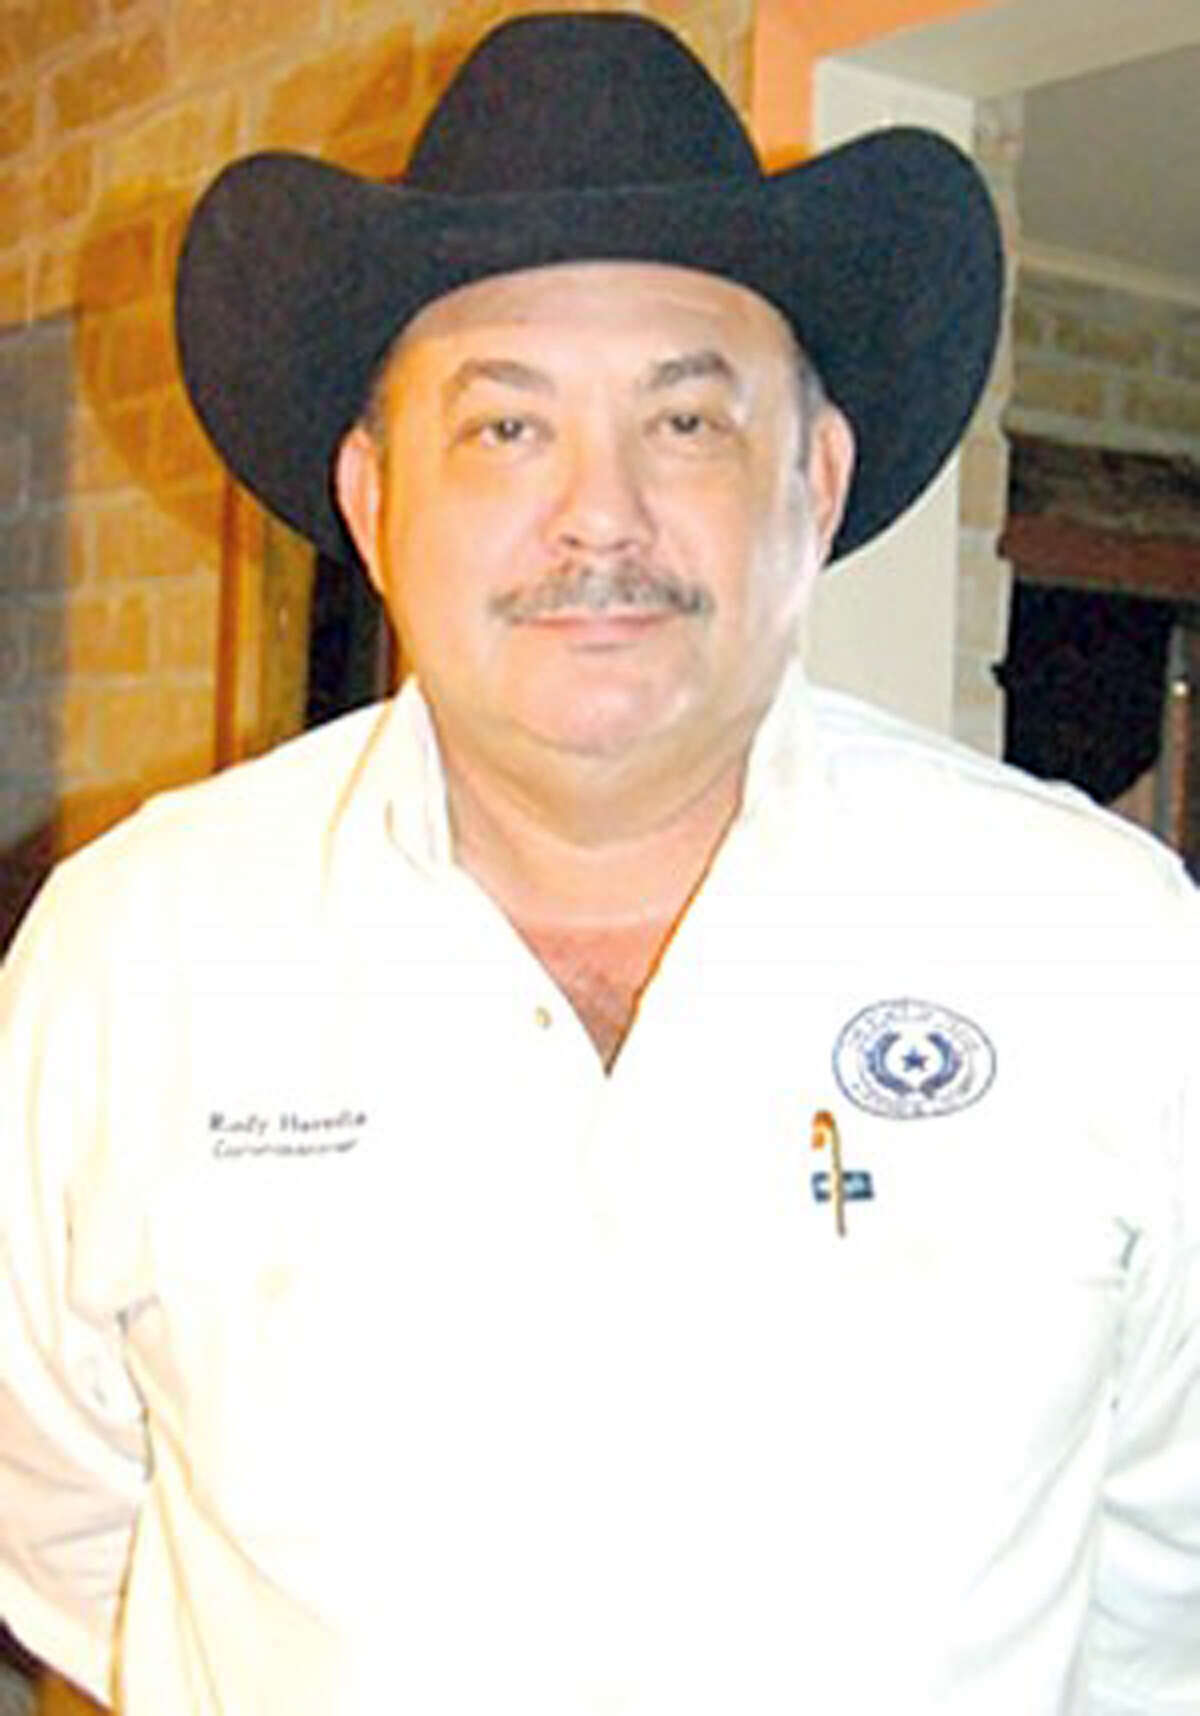 Maverick County Commissioner Rodolfo Heredia is accussed of smuggling money into the United States from Mexico after selling his truck to a Zetas associate.